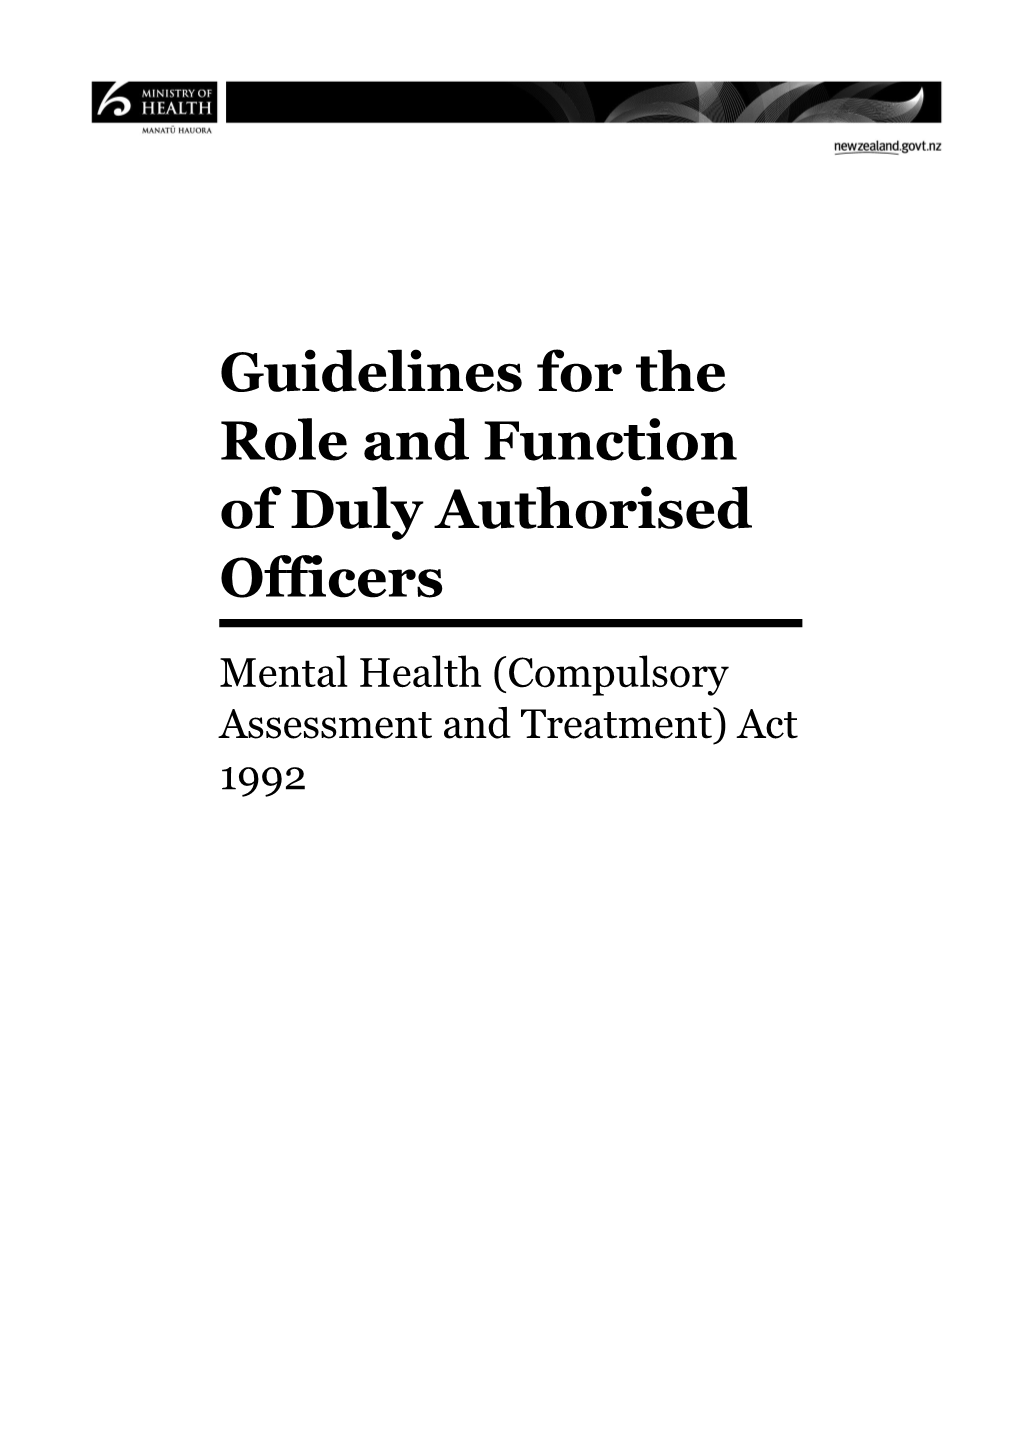 Guidelines for the Role and Function of Duly Authorised Officers